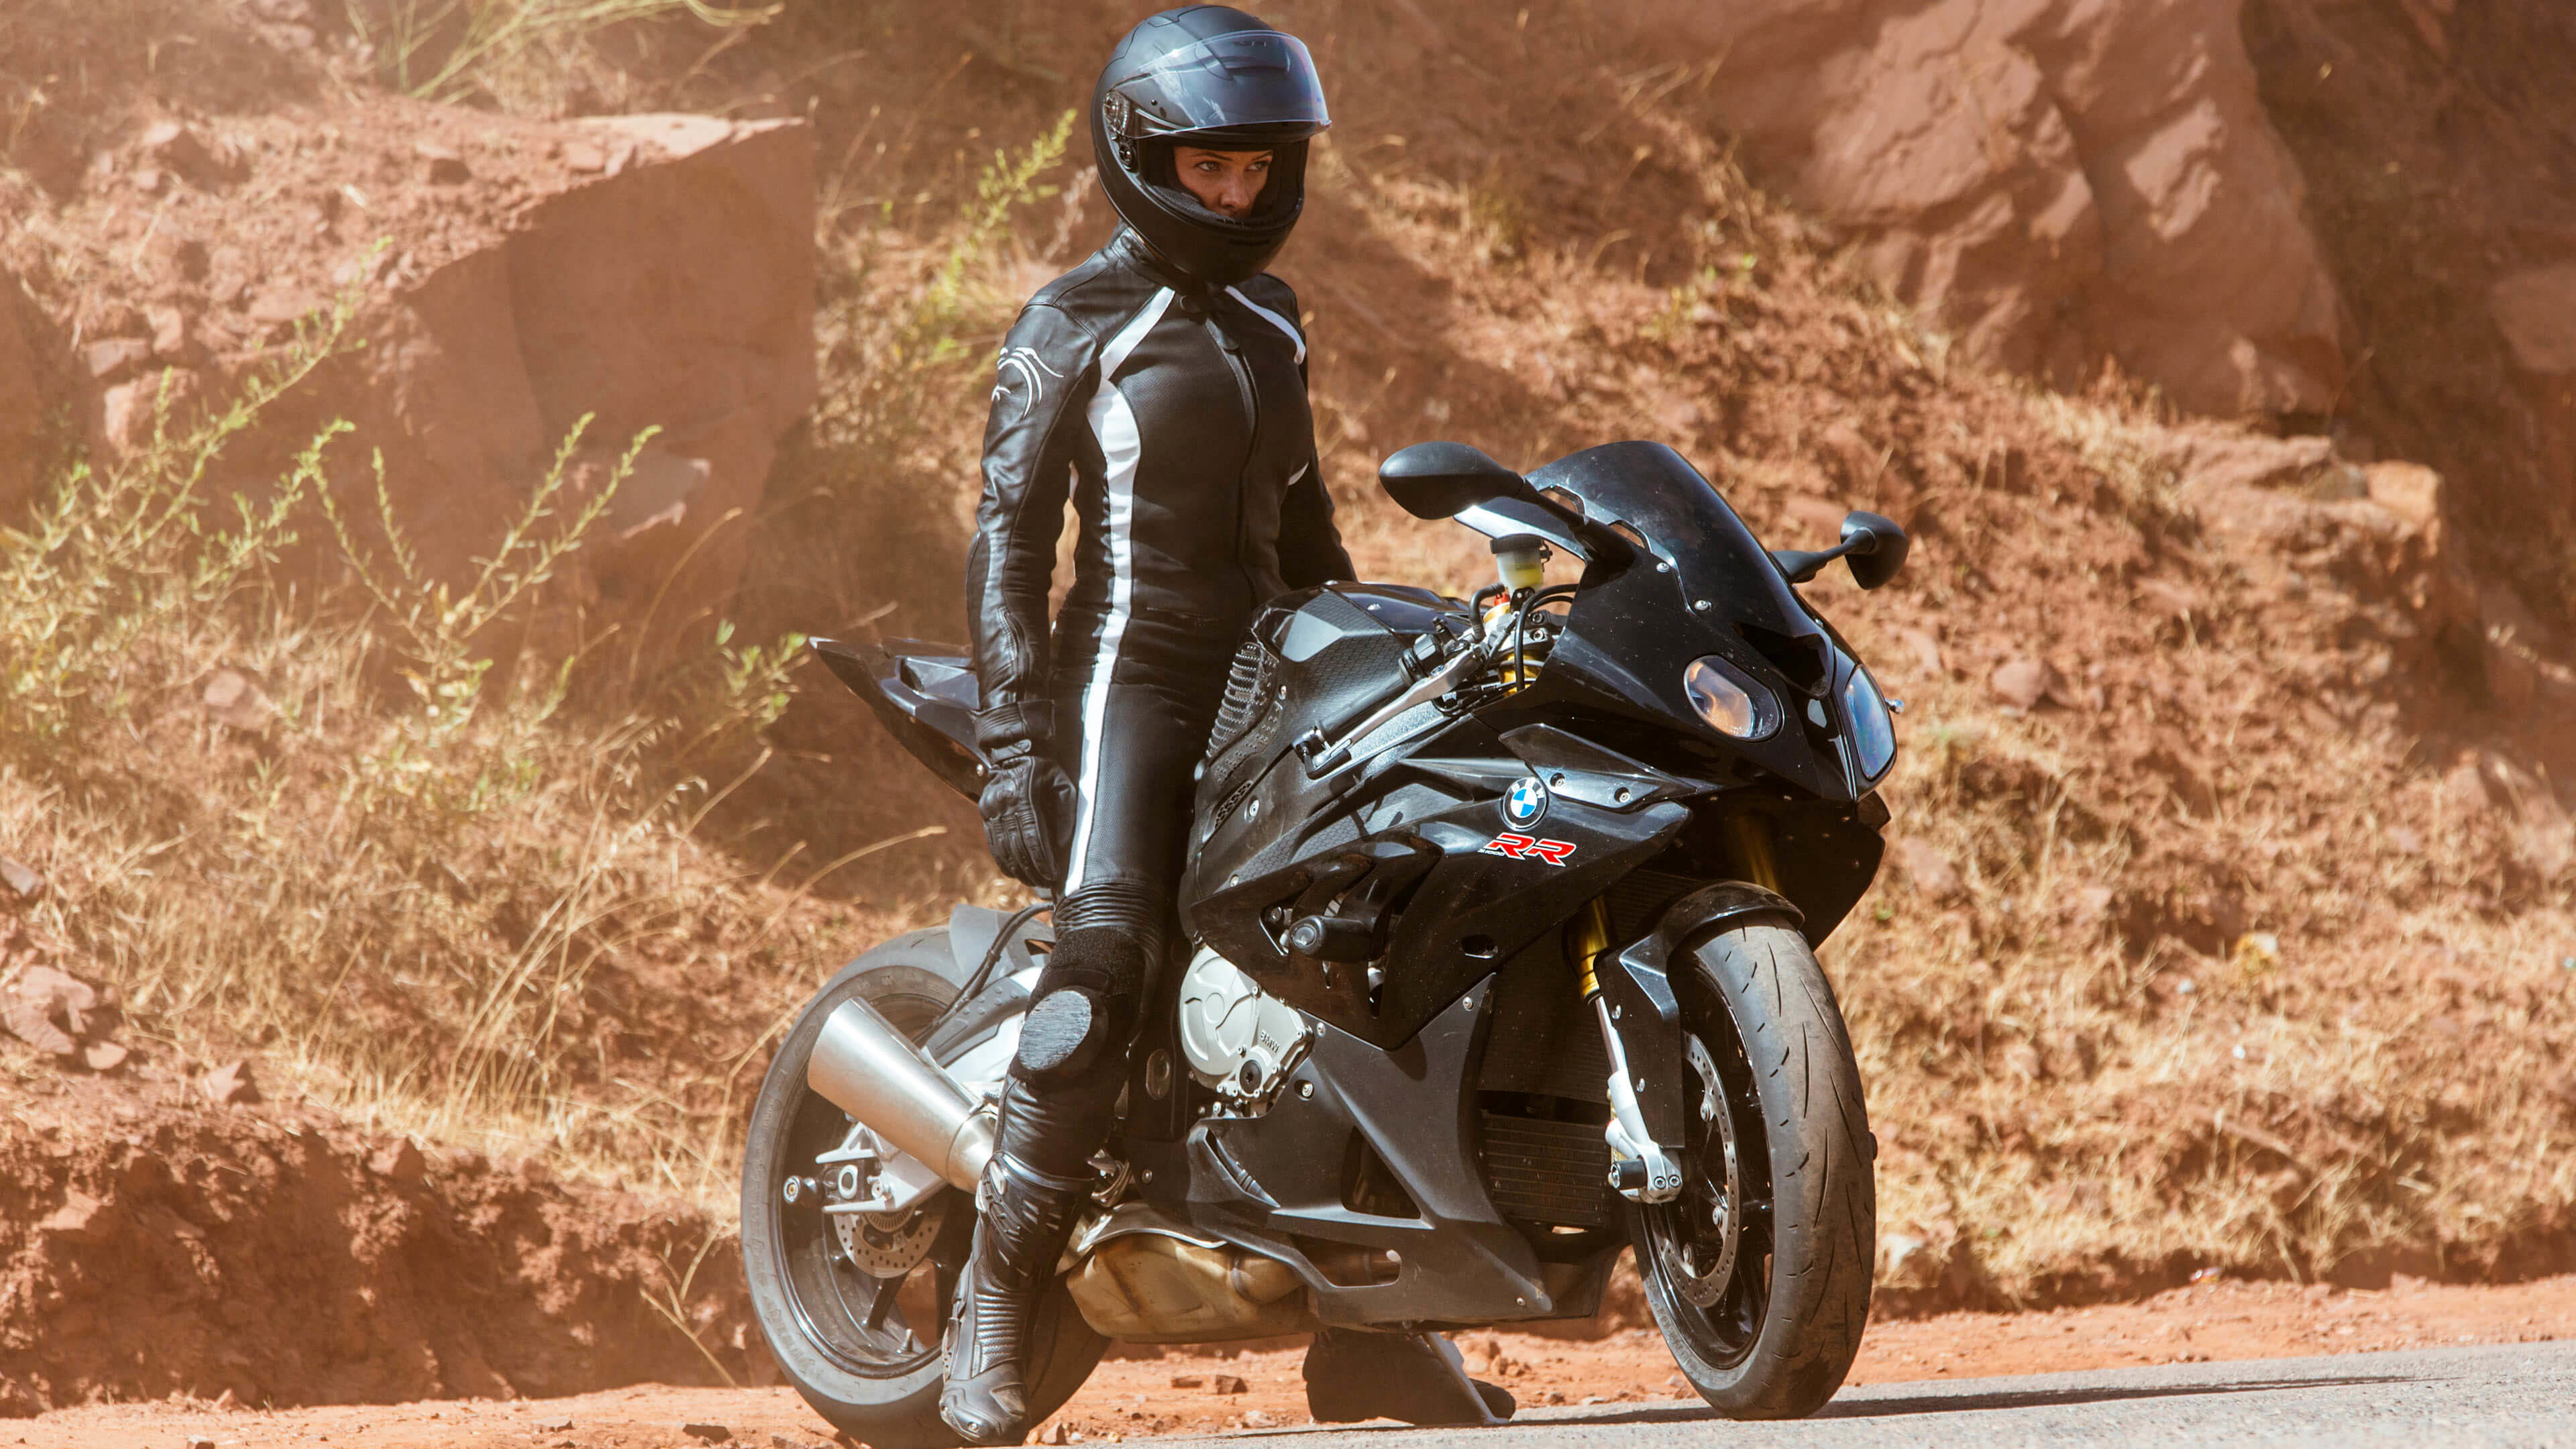 3840x2160 Rebbeca Ferguson on BMW S 1000 RR Motorcycle for Mission: Impossible –  Rogue Nation 